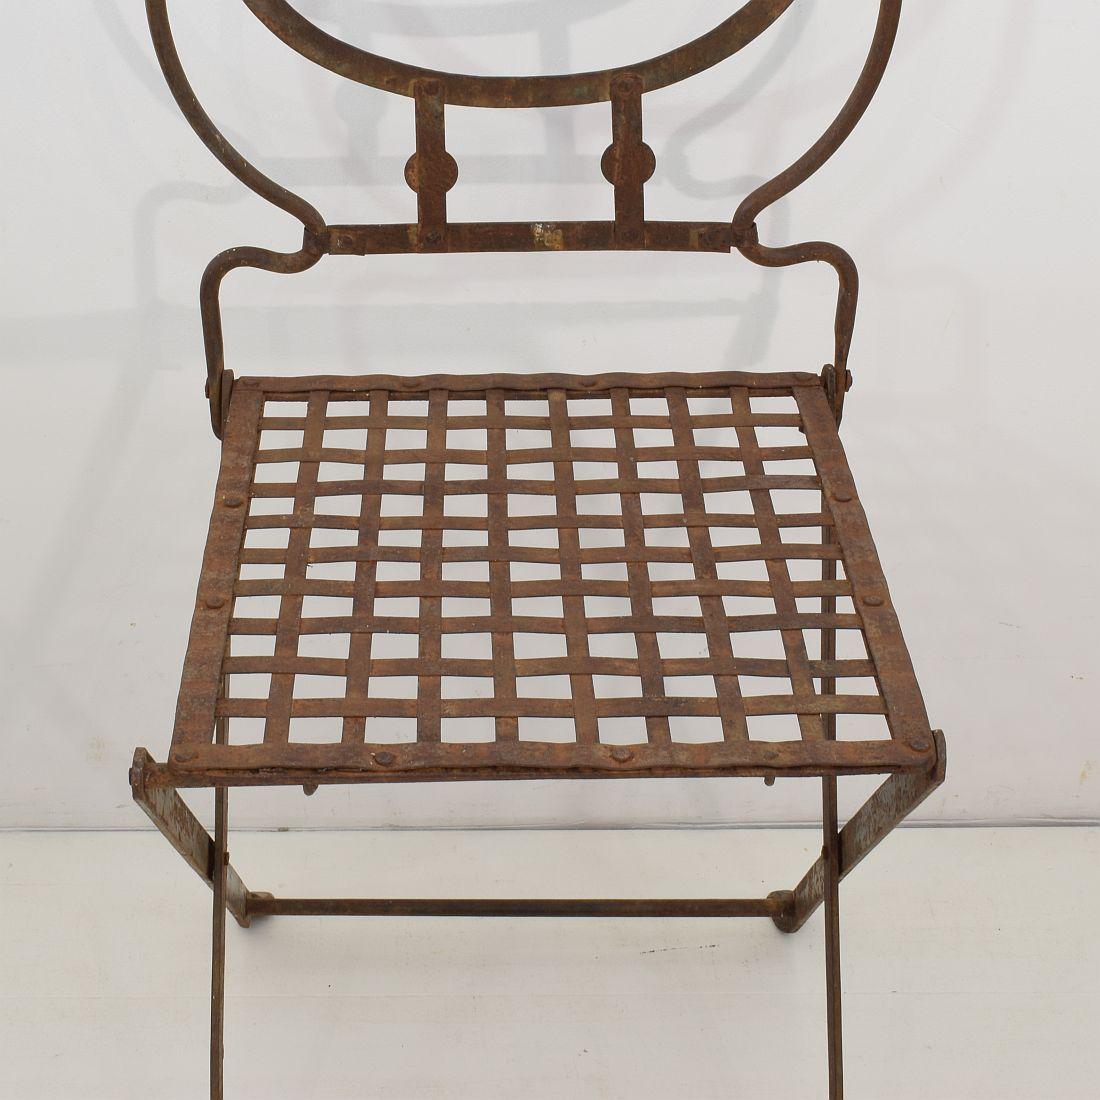 Pair of 19th Century French Iron Folding Garden Chairs with Small Table/Stool 12